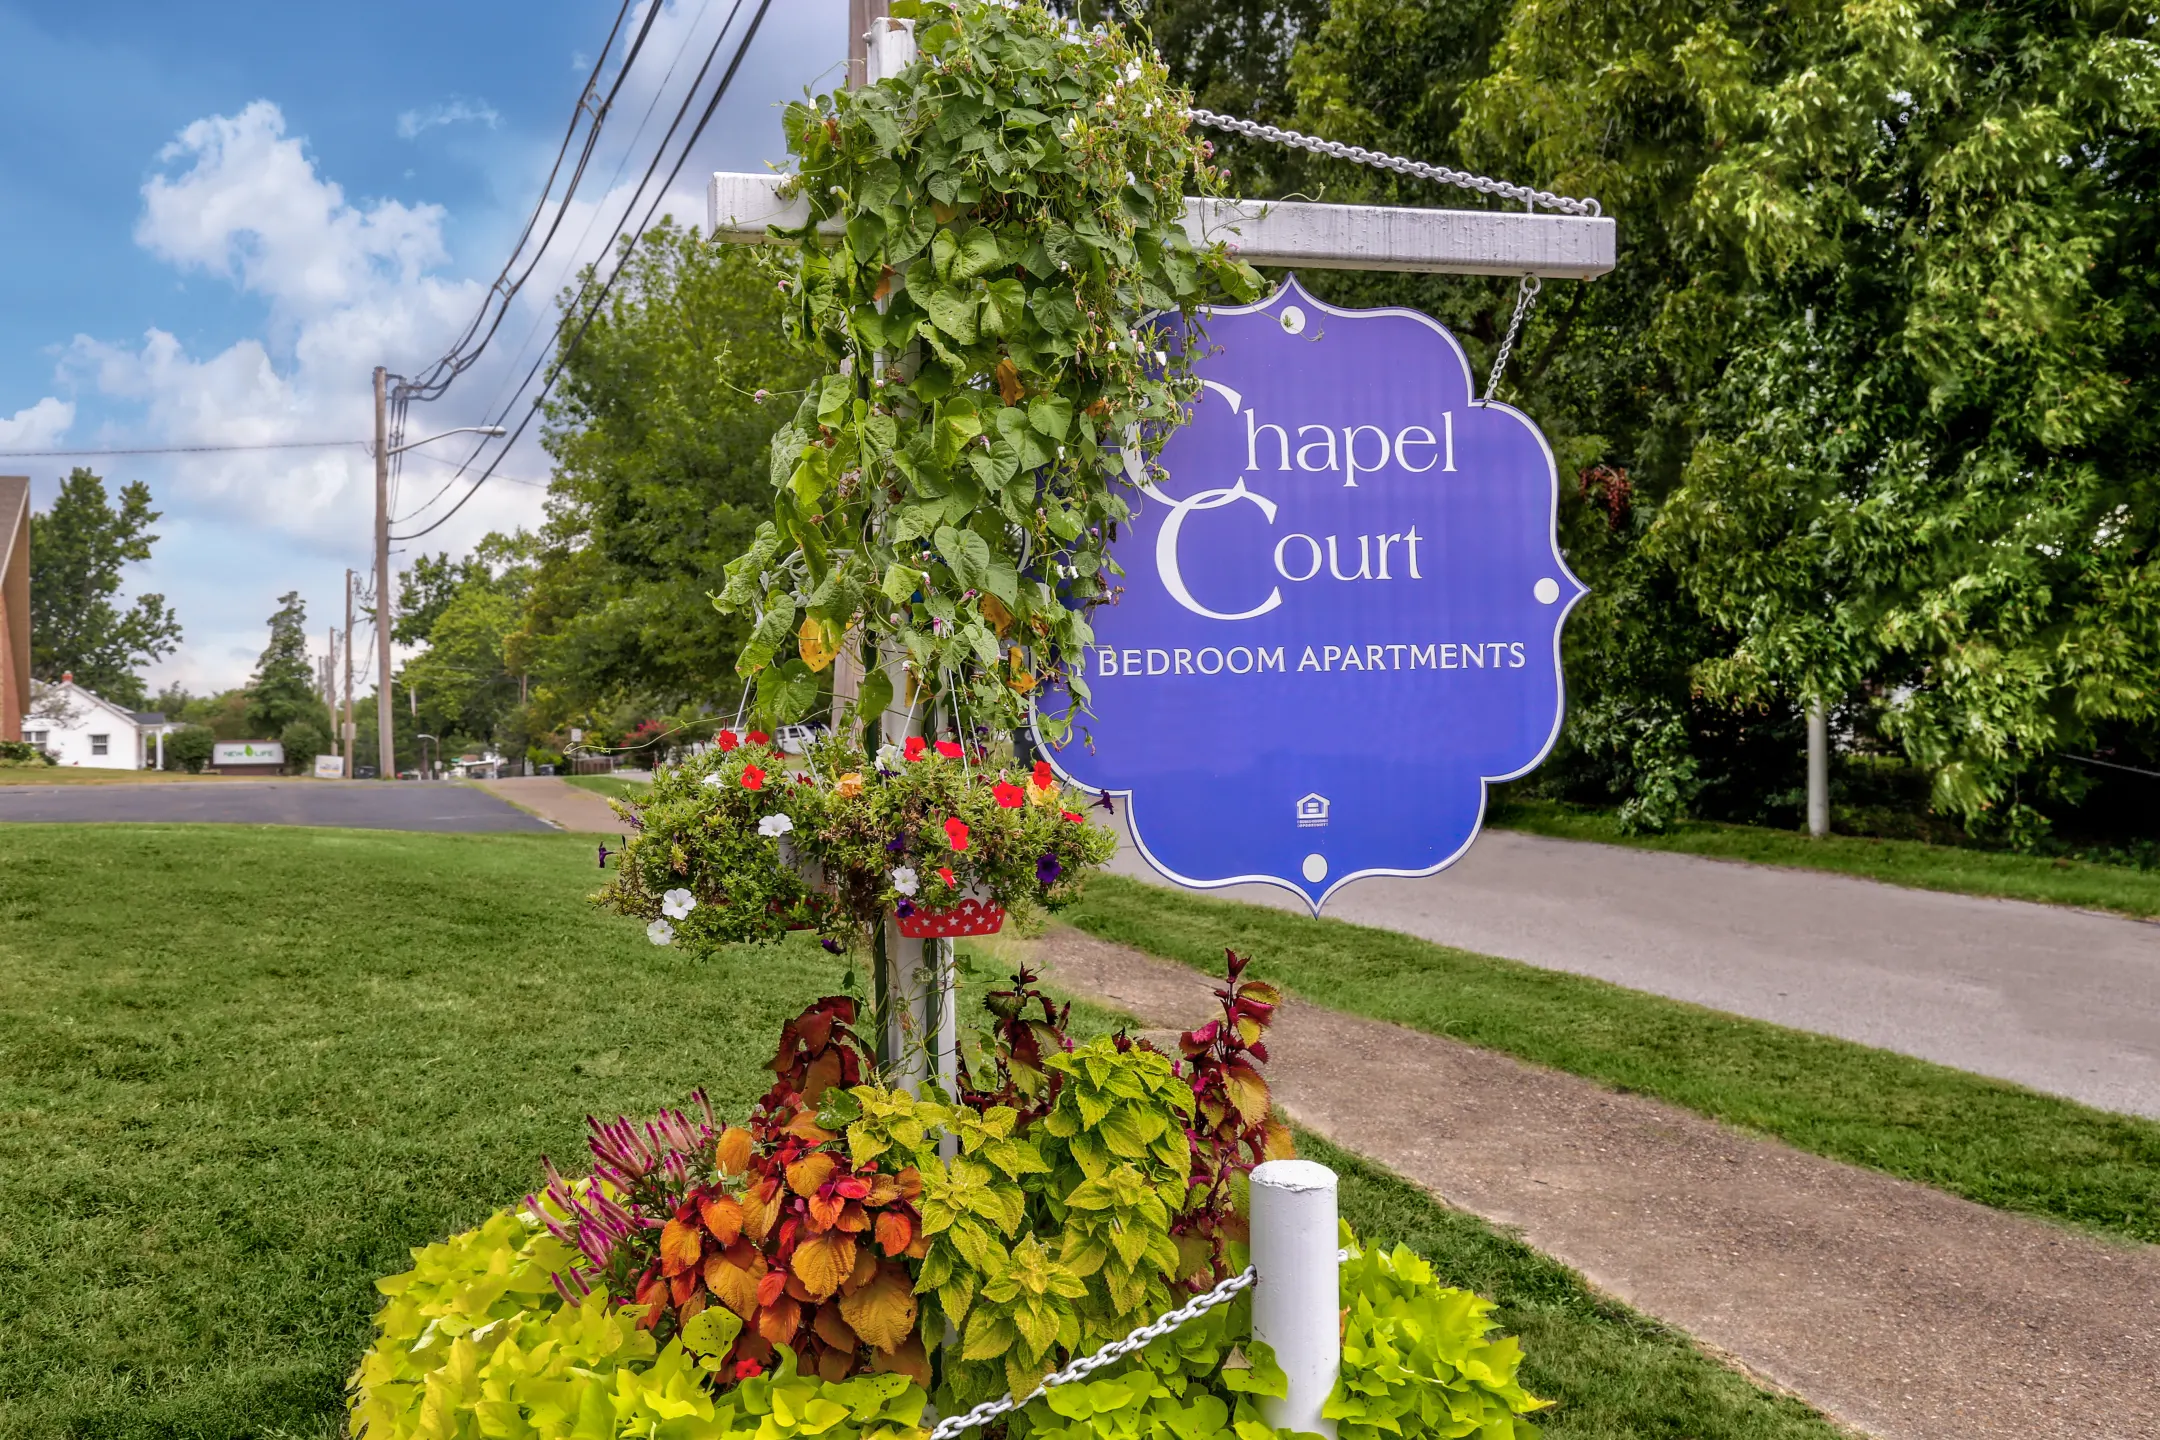 Community Signage - Chapel Court Apartments - Evansville, IN